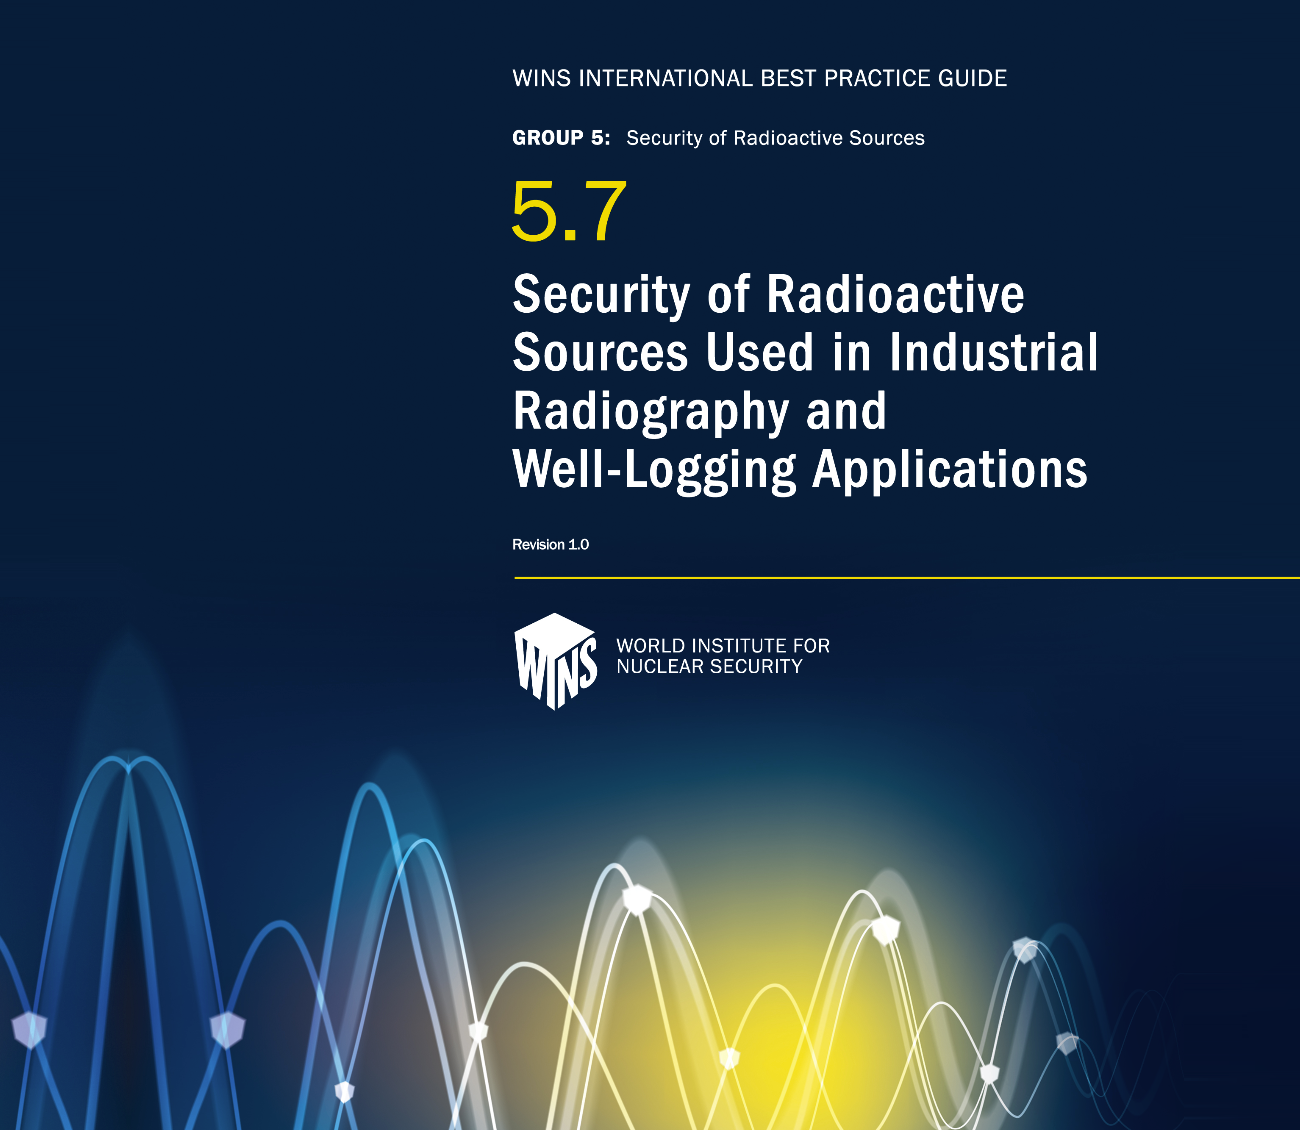 New WINS International Best Practice Guide:   5.7 Security of Radioactive Sources Used in Industrial Radiography & Well-Logging Applications